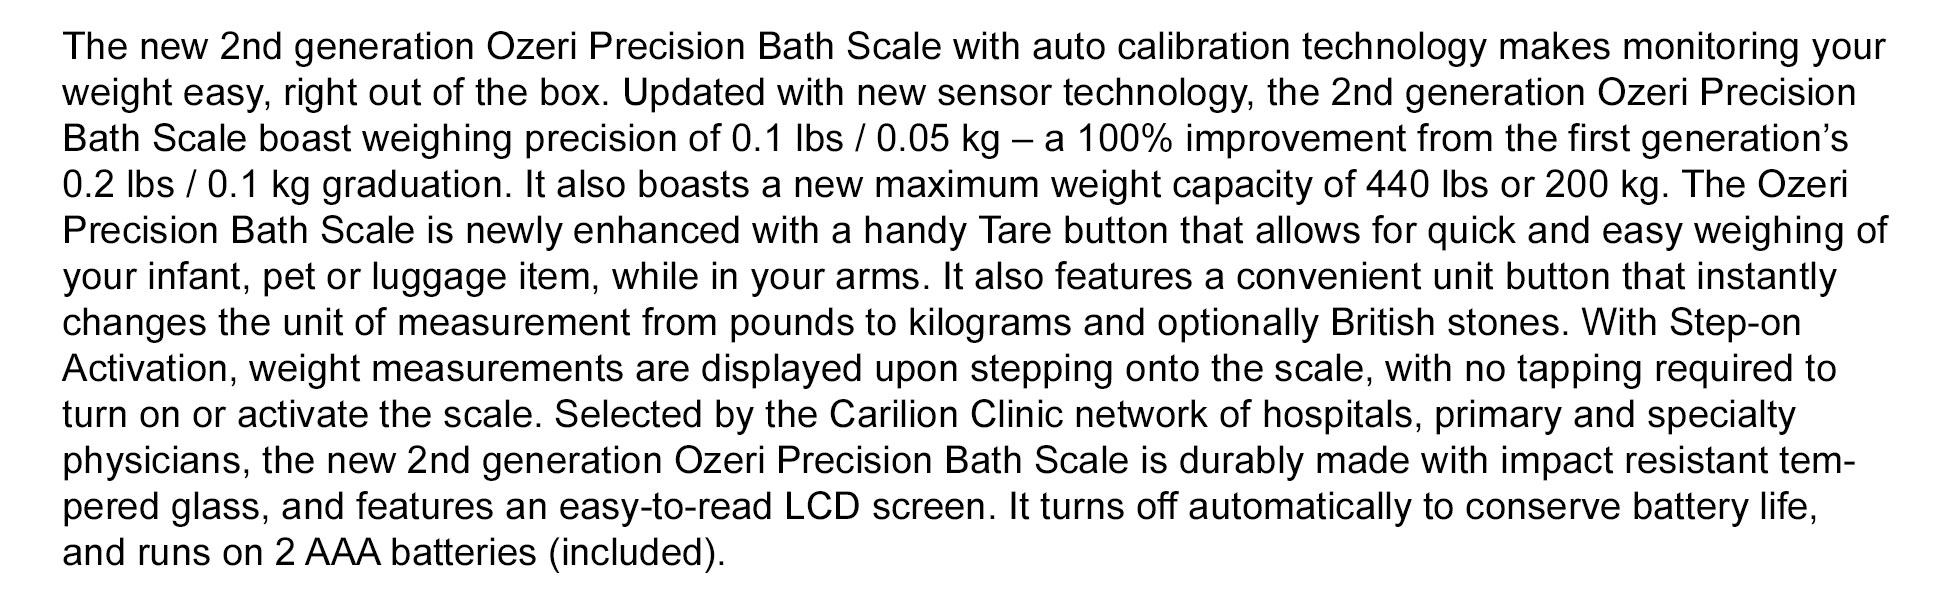 Ozeri Precision Bath Scale (440 lbs / 200 kg) in Tempered Glass, with 50 Gram Sensor Technology (0.1 lbs / 0.05 kg) and Infant, Pet & Luggage Tare